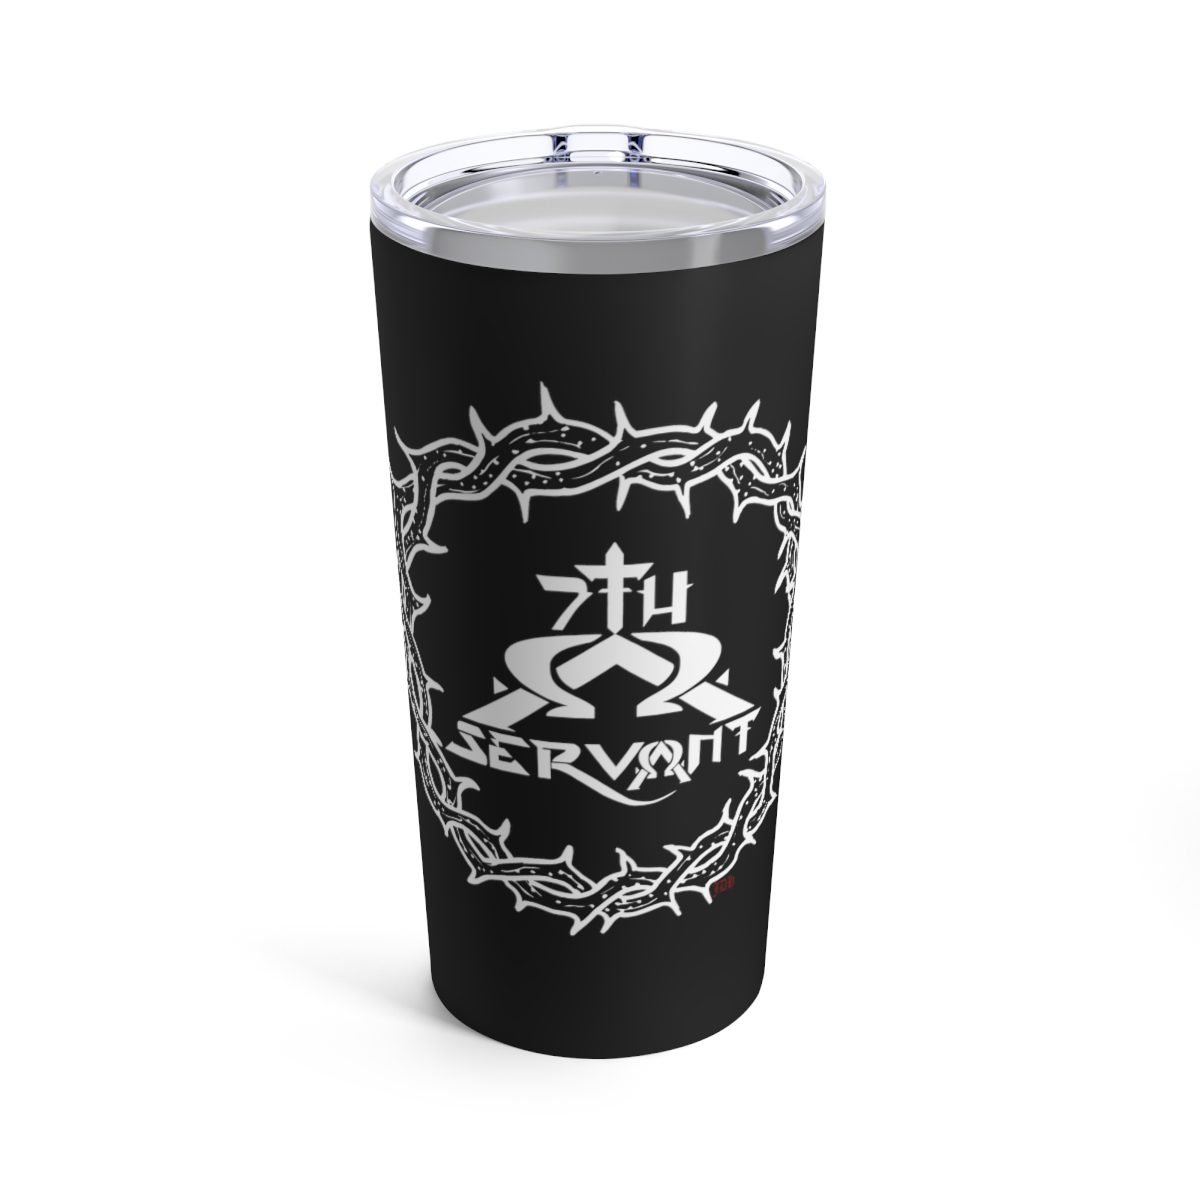 Seventh Servant Alpha and Omega 20oz Stainless Steel Tumbler